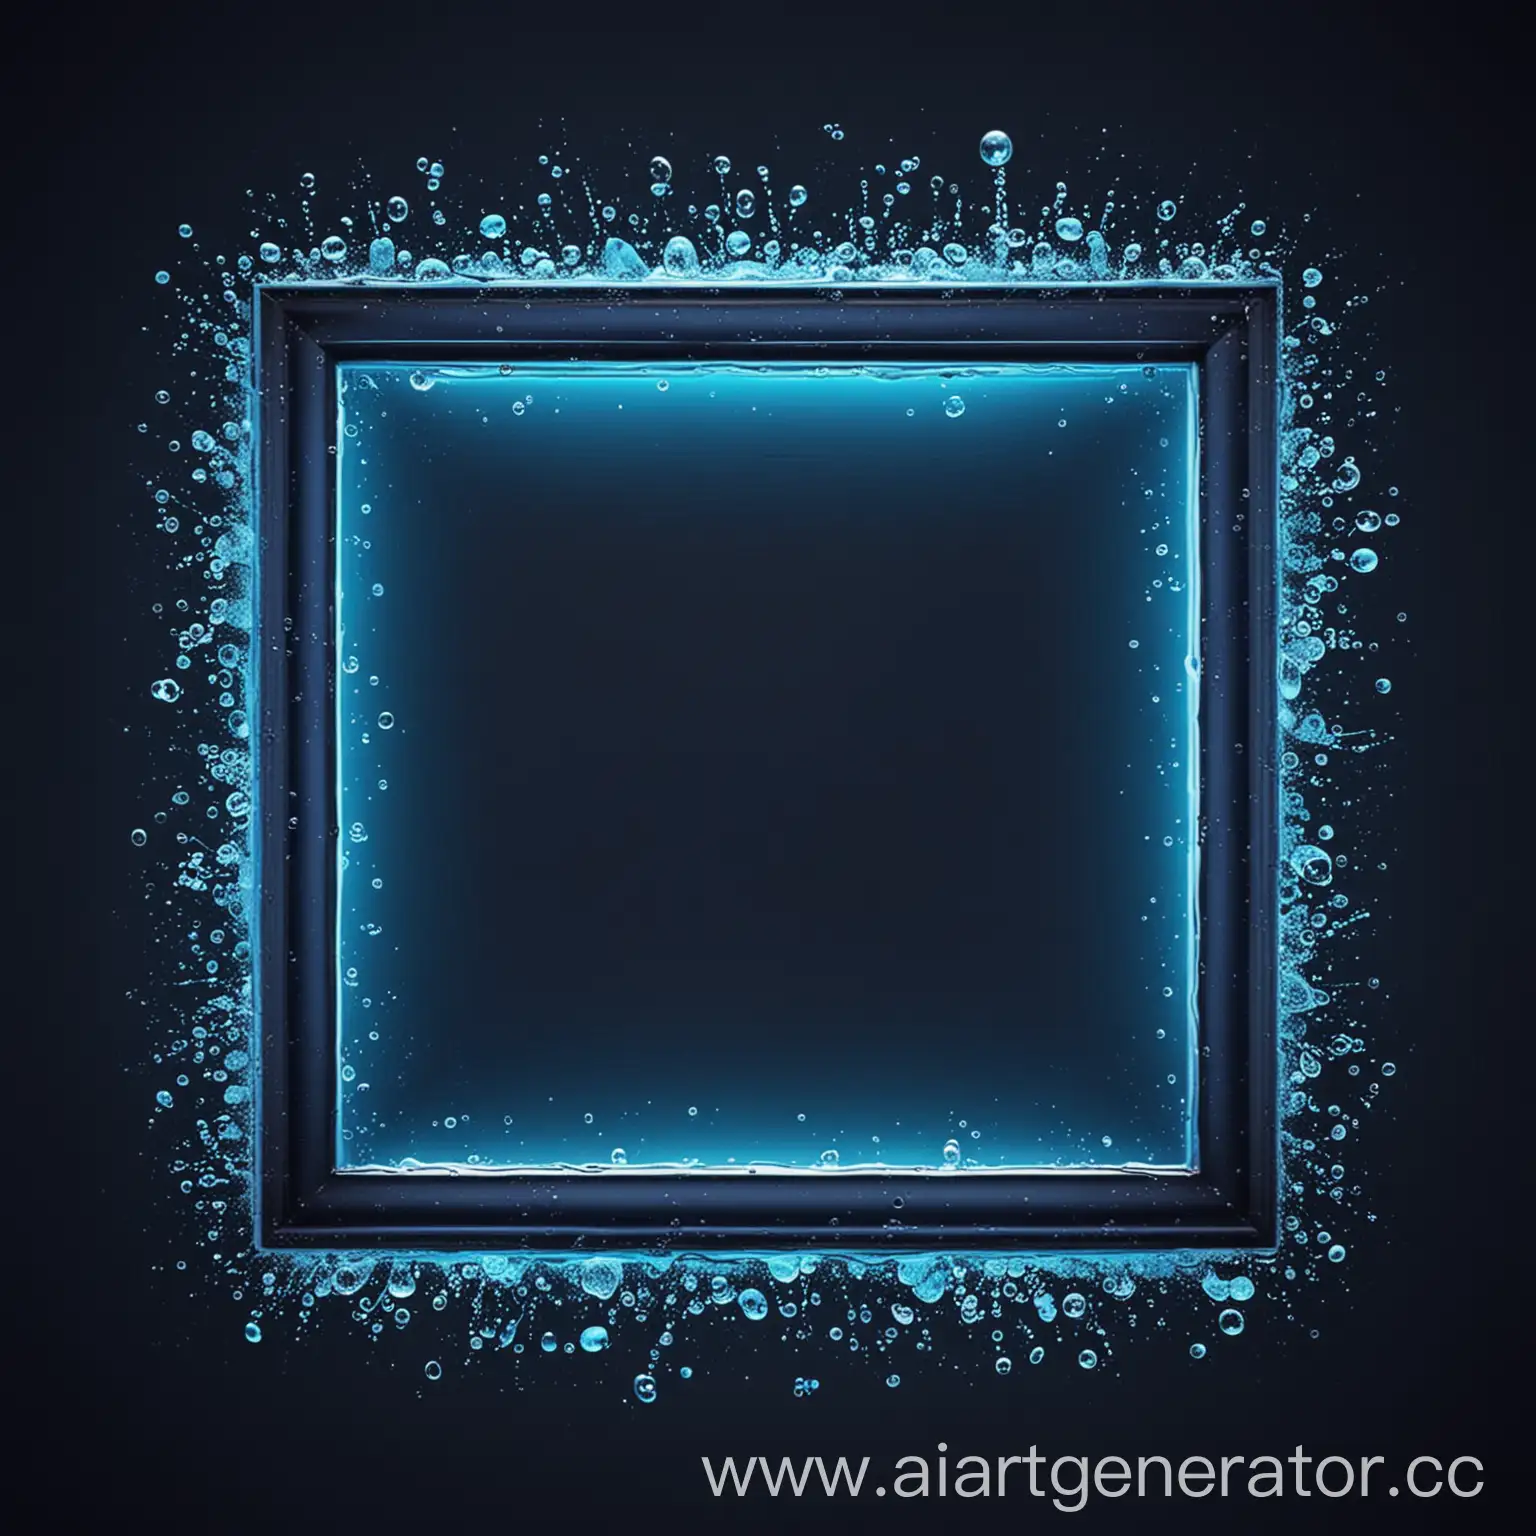 Blue-Neon-Square-Frame-on-Dark-Blue-Background-with-Water-Bubbles